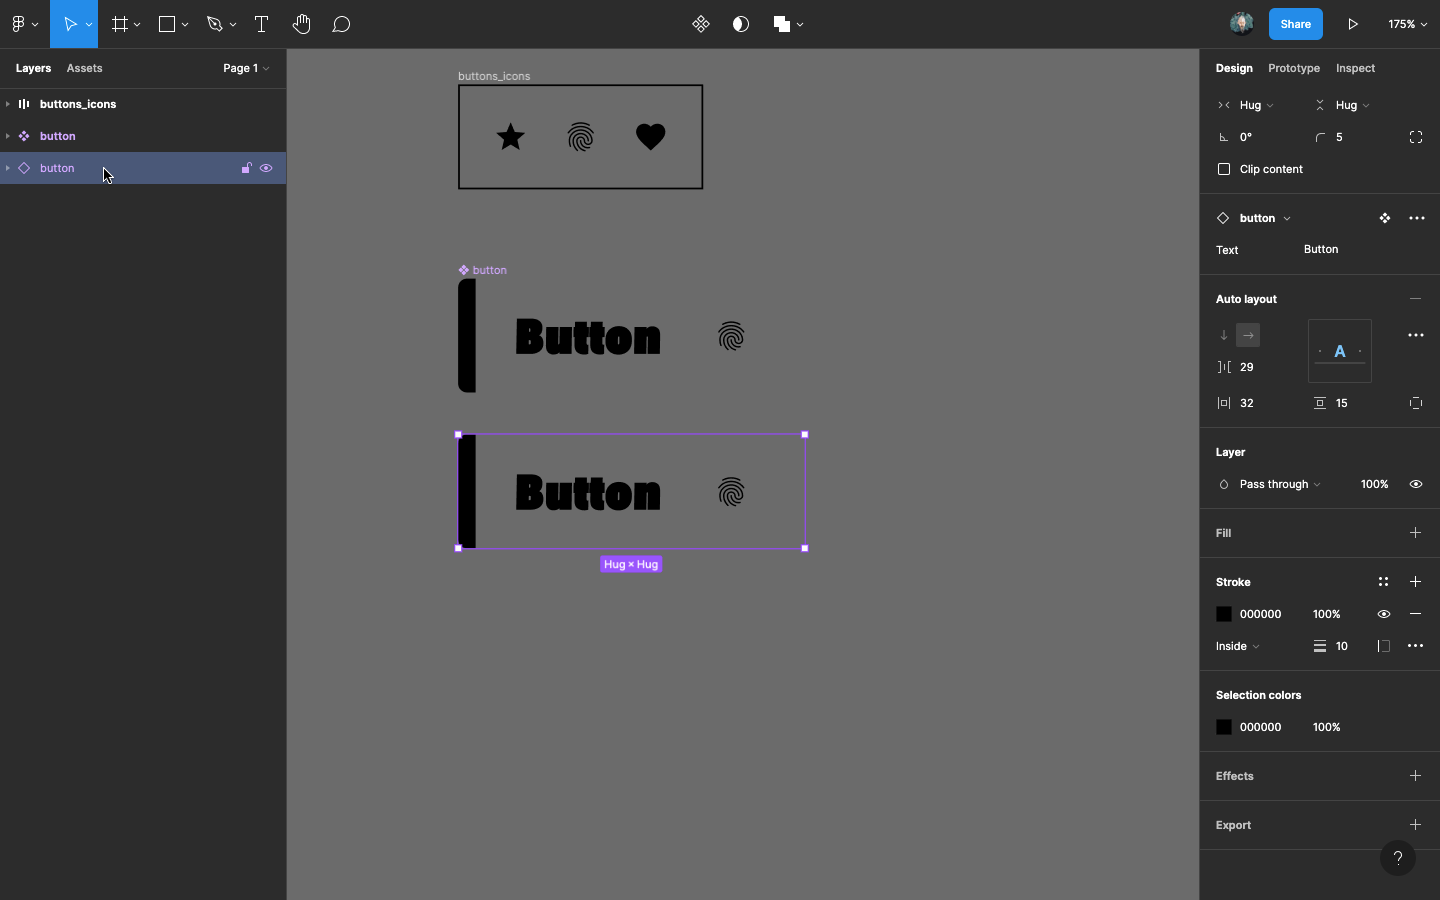 Create an instance of your button component